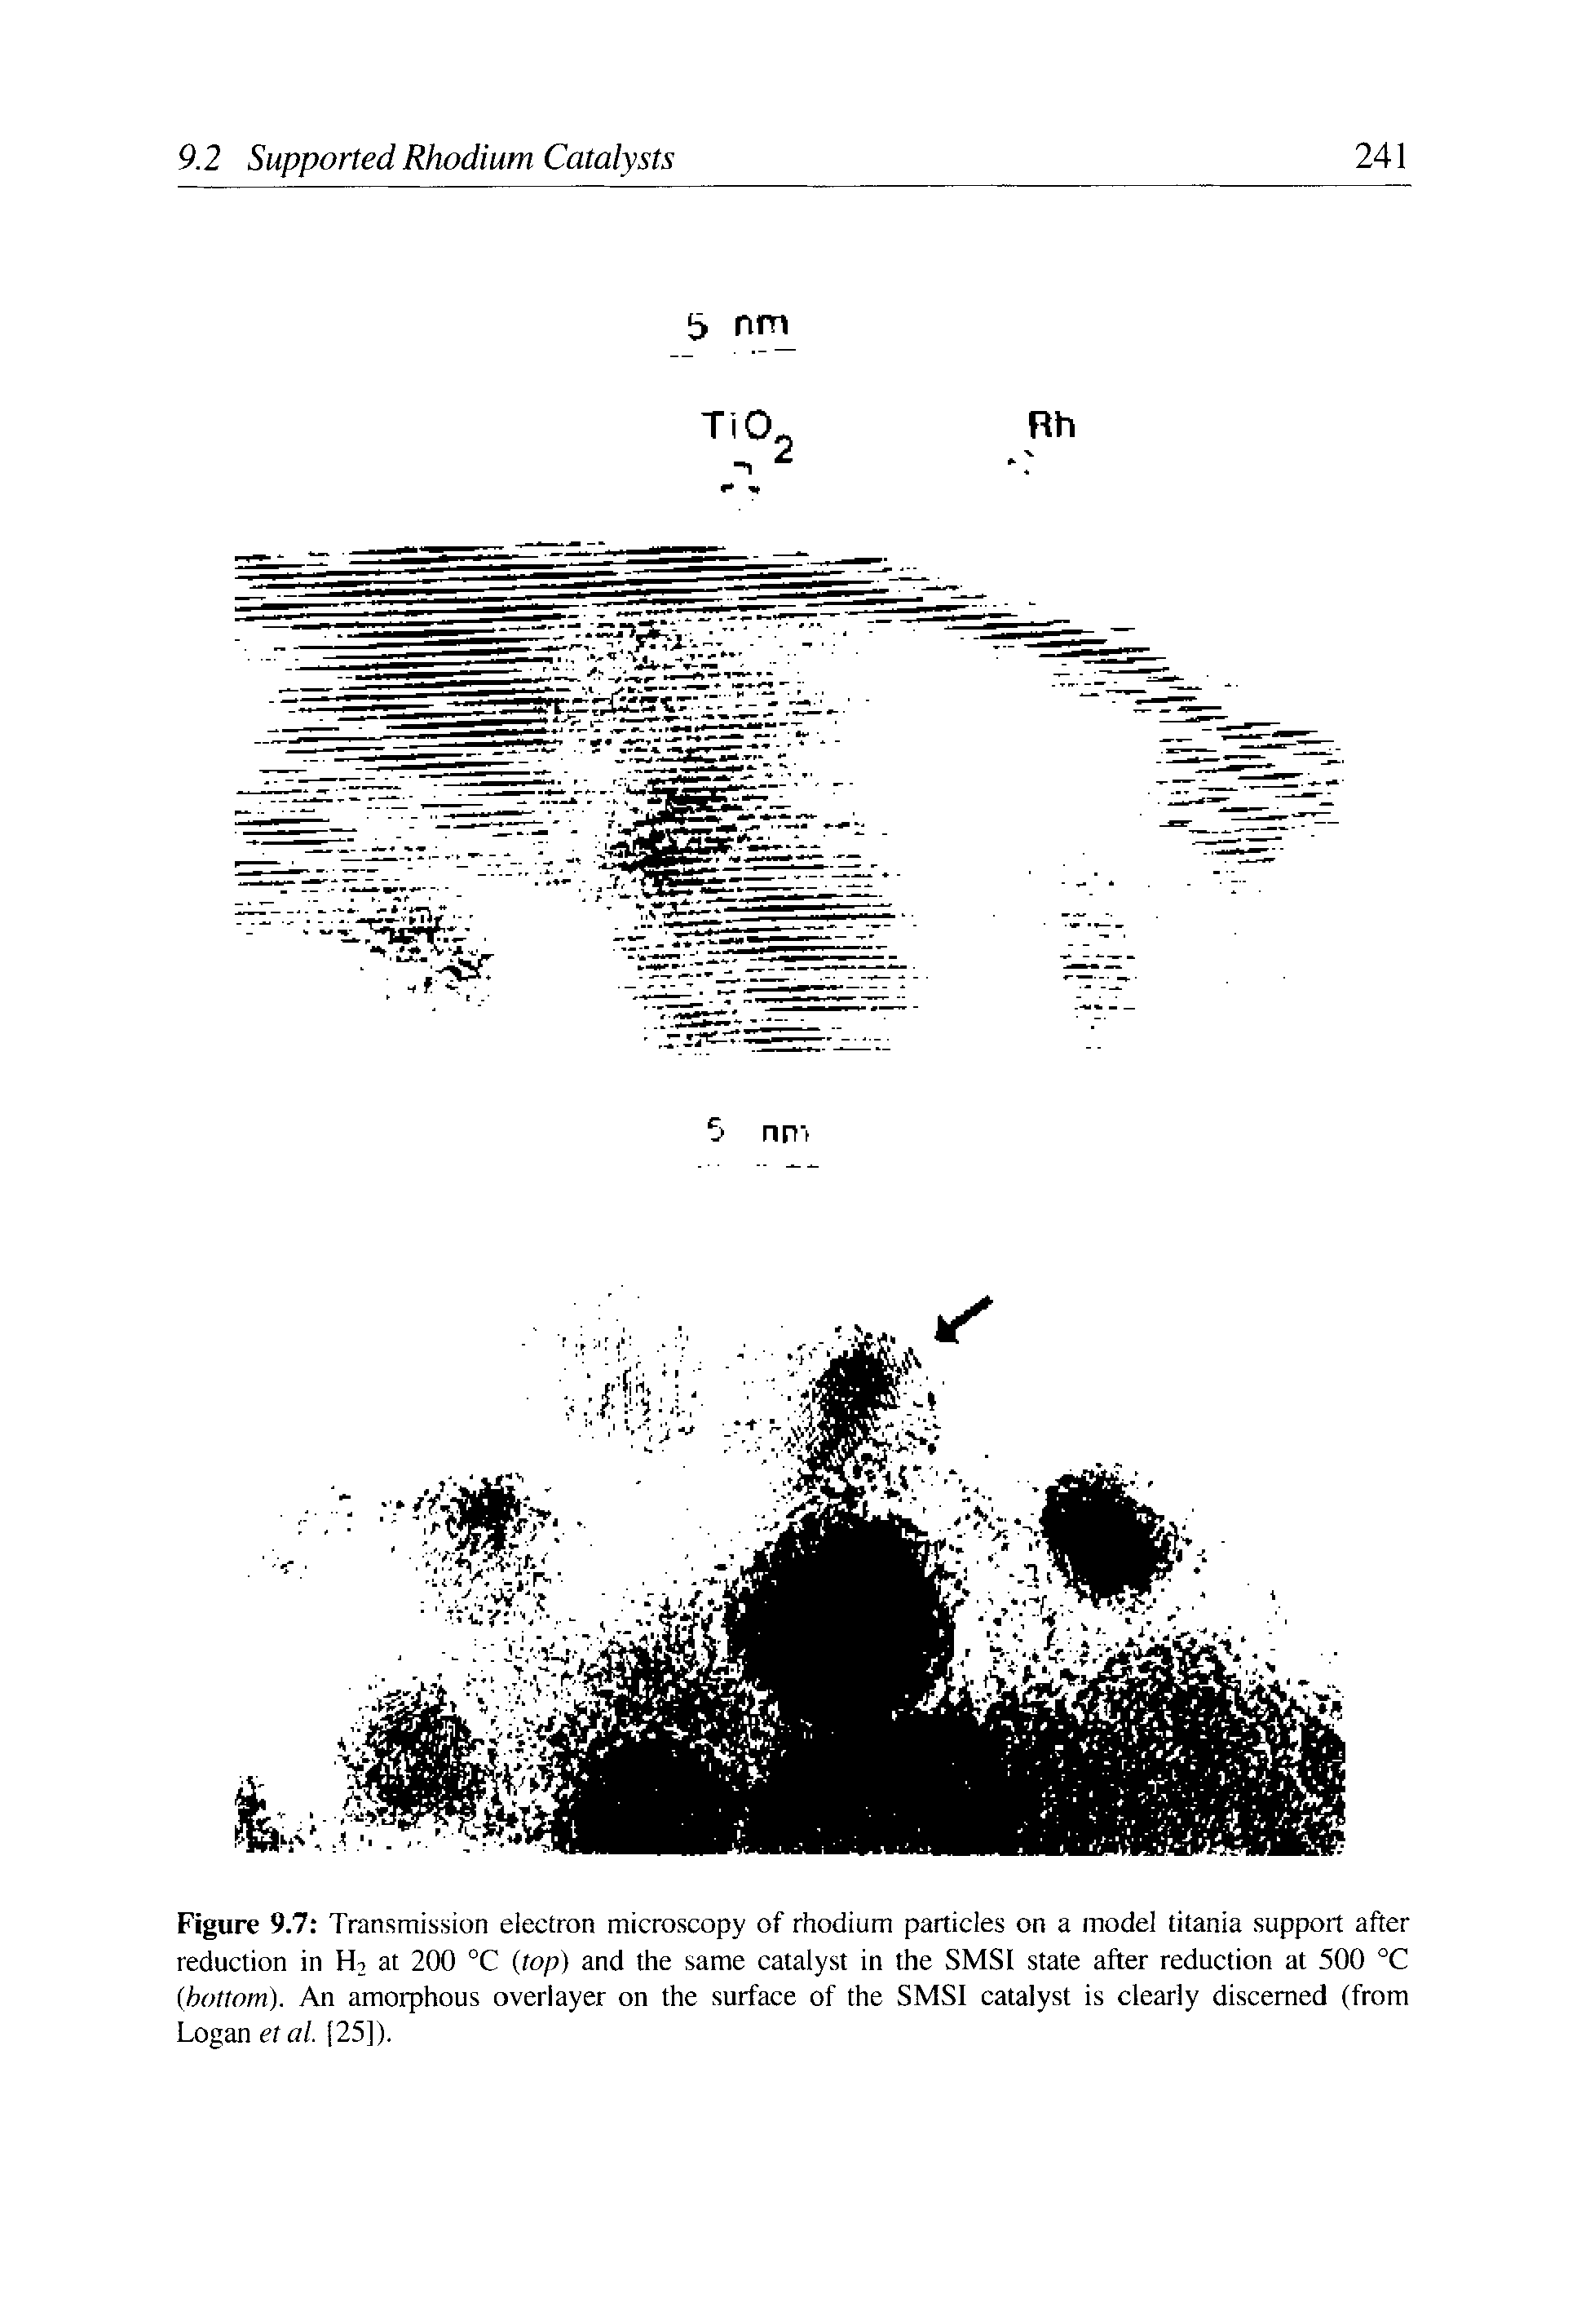 Figure 9.7 Transmission electron microscopy of rhodium particles on a model titania support after reduction in H2 at 200 °C (top) and the same catalyst in the SMSI state after reduction at 500 °C (bottom). An amorphous overlayer on the surface of the SMSI catalyst is clearly discerned (from Logan etal. [25]).